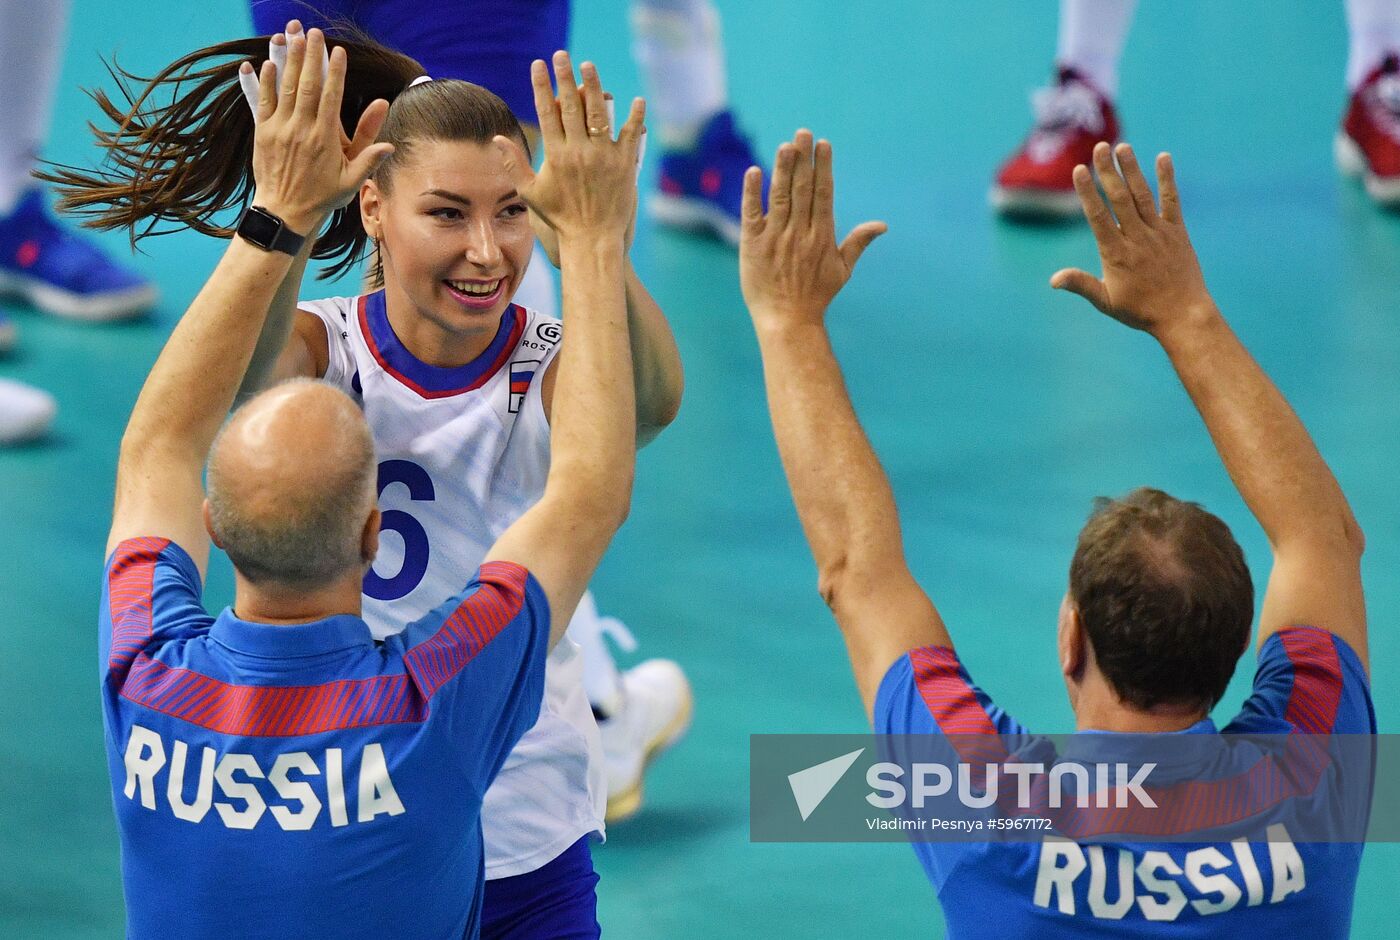 Russia Volleyball 2020 Olympic Qualifiers Russia - Canada